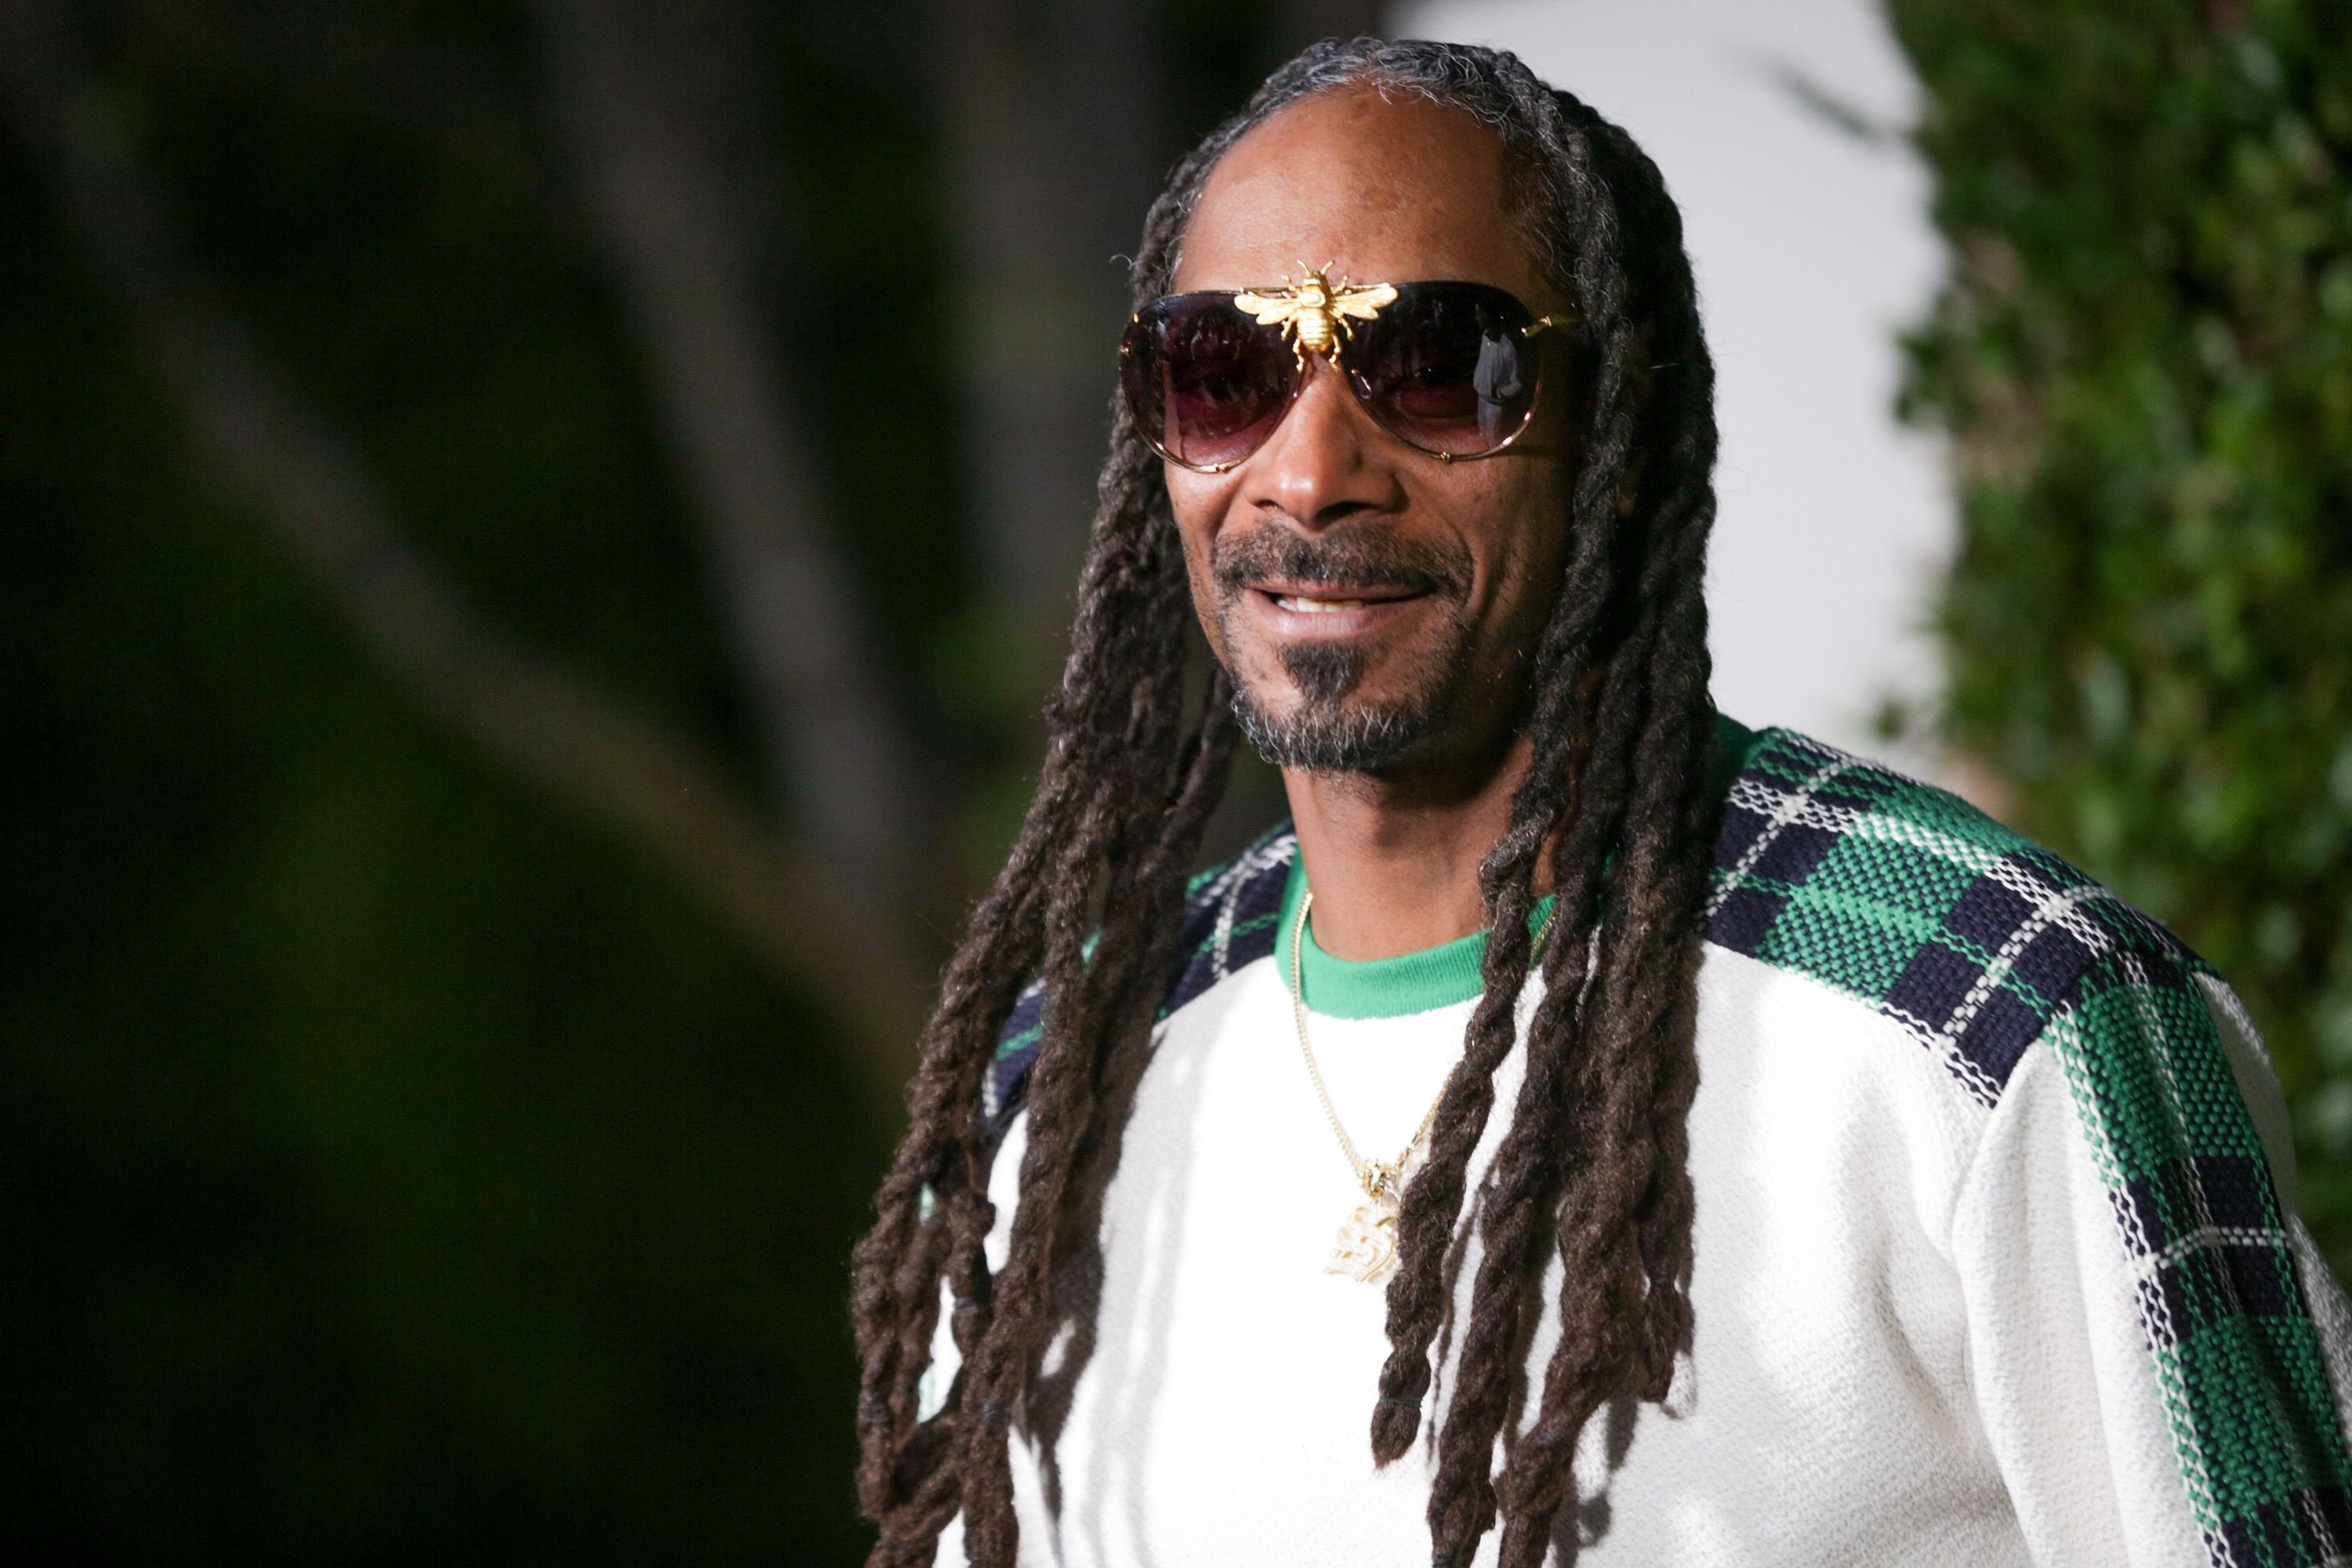 Snopp Dogg at the CHANEL Dinner Celebrating Our Majestic Oceans, A Benefit For NRDC on June 2, 2018 | Photo: Getty Images